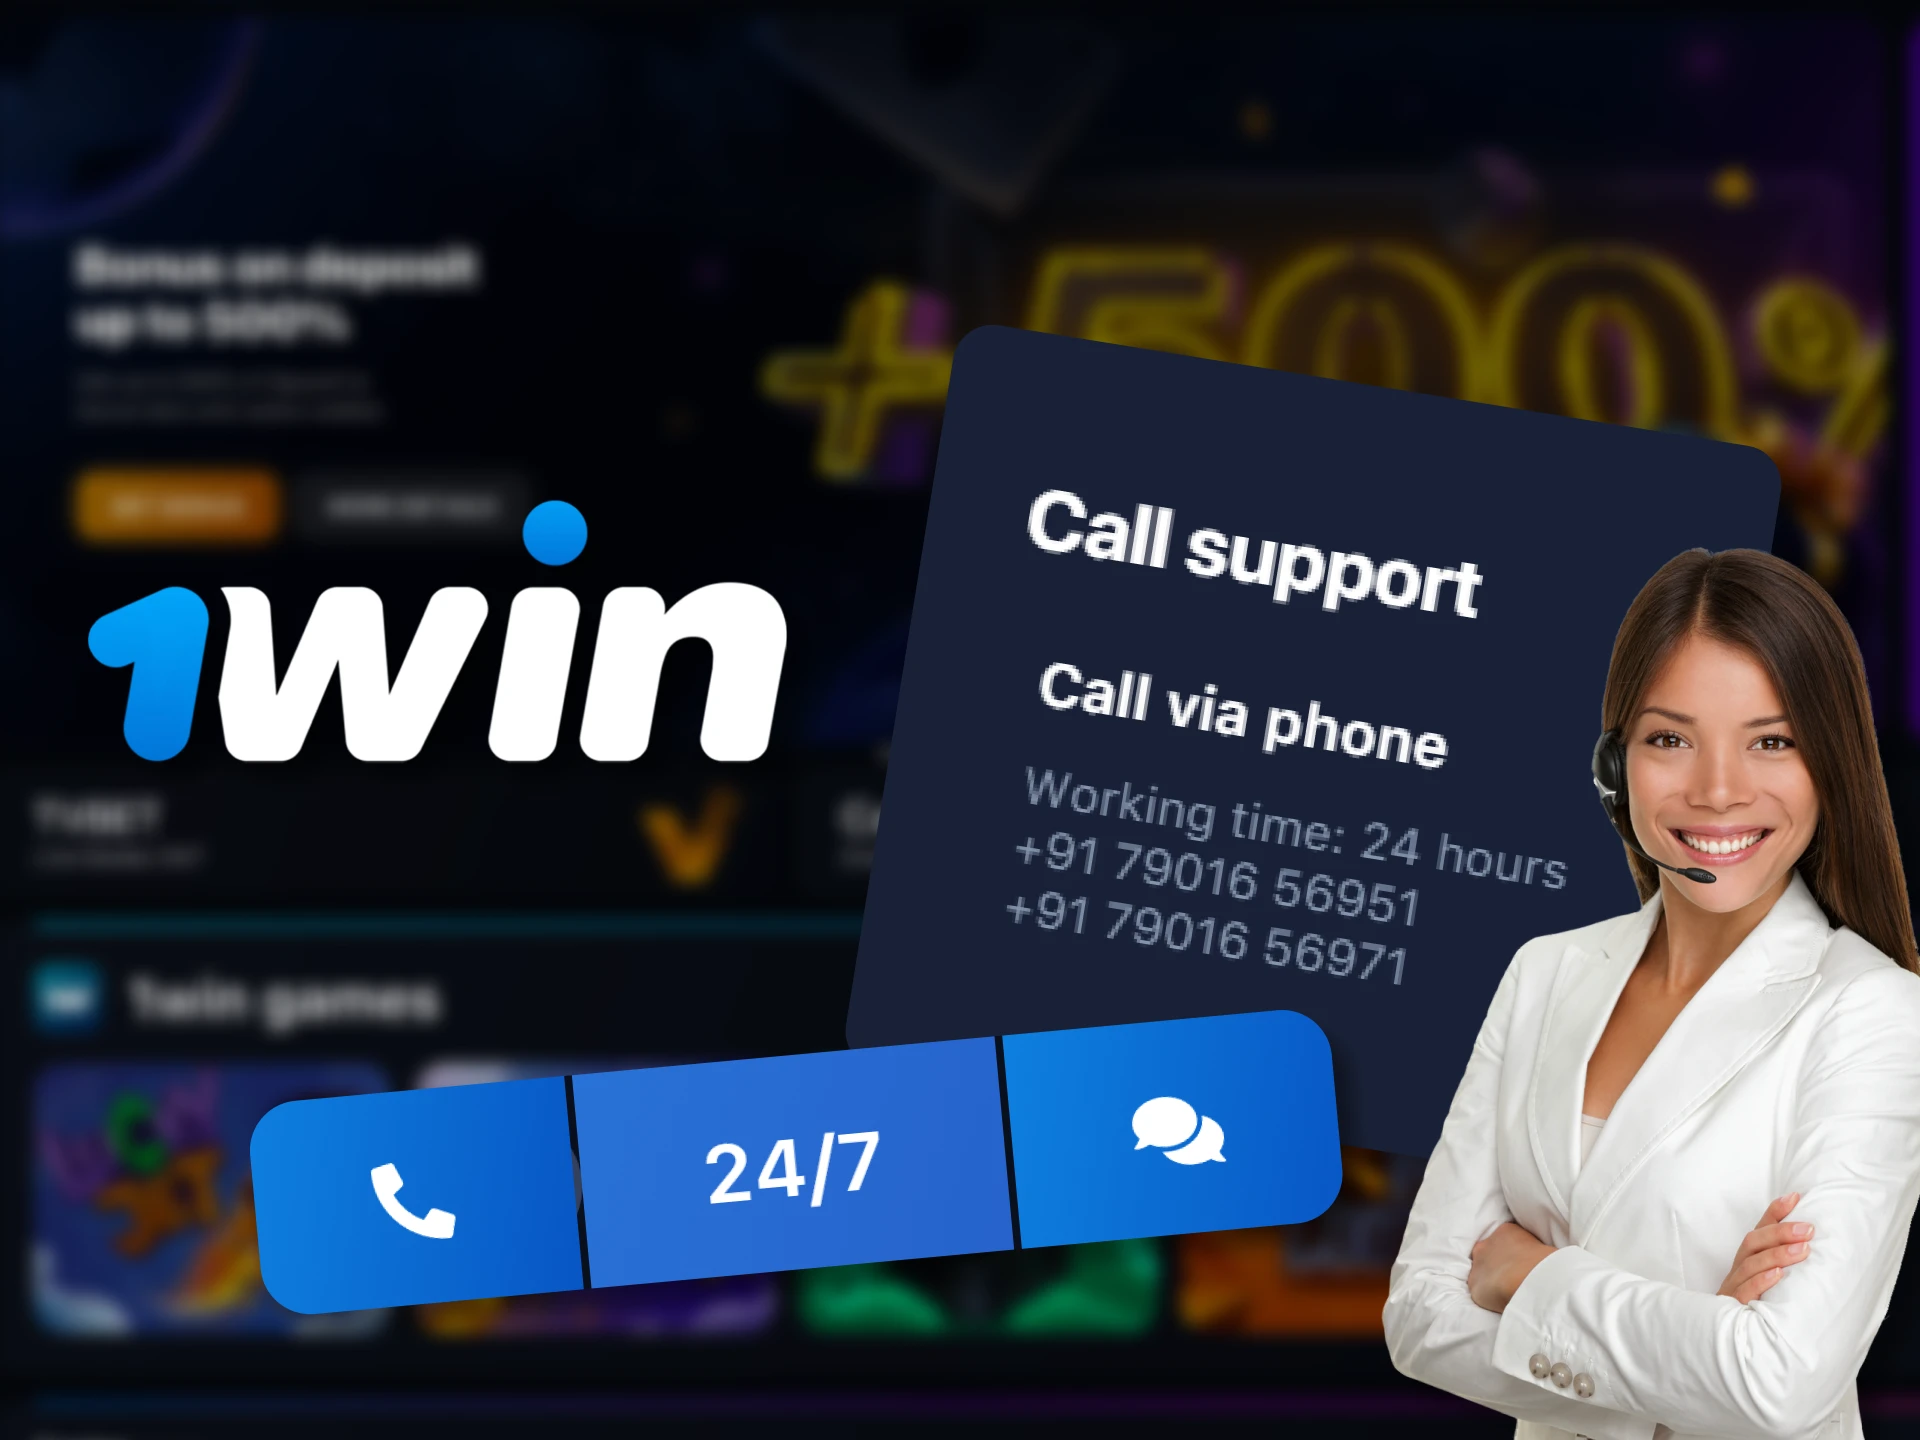 At 1win you can always get support by phone.